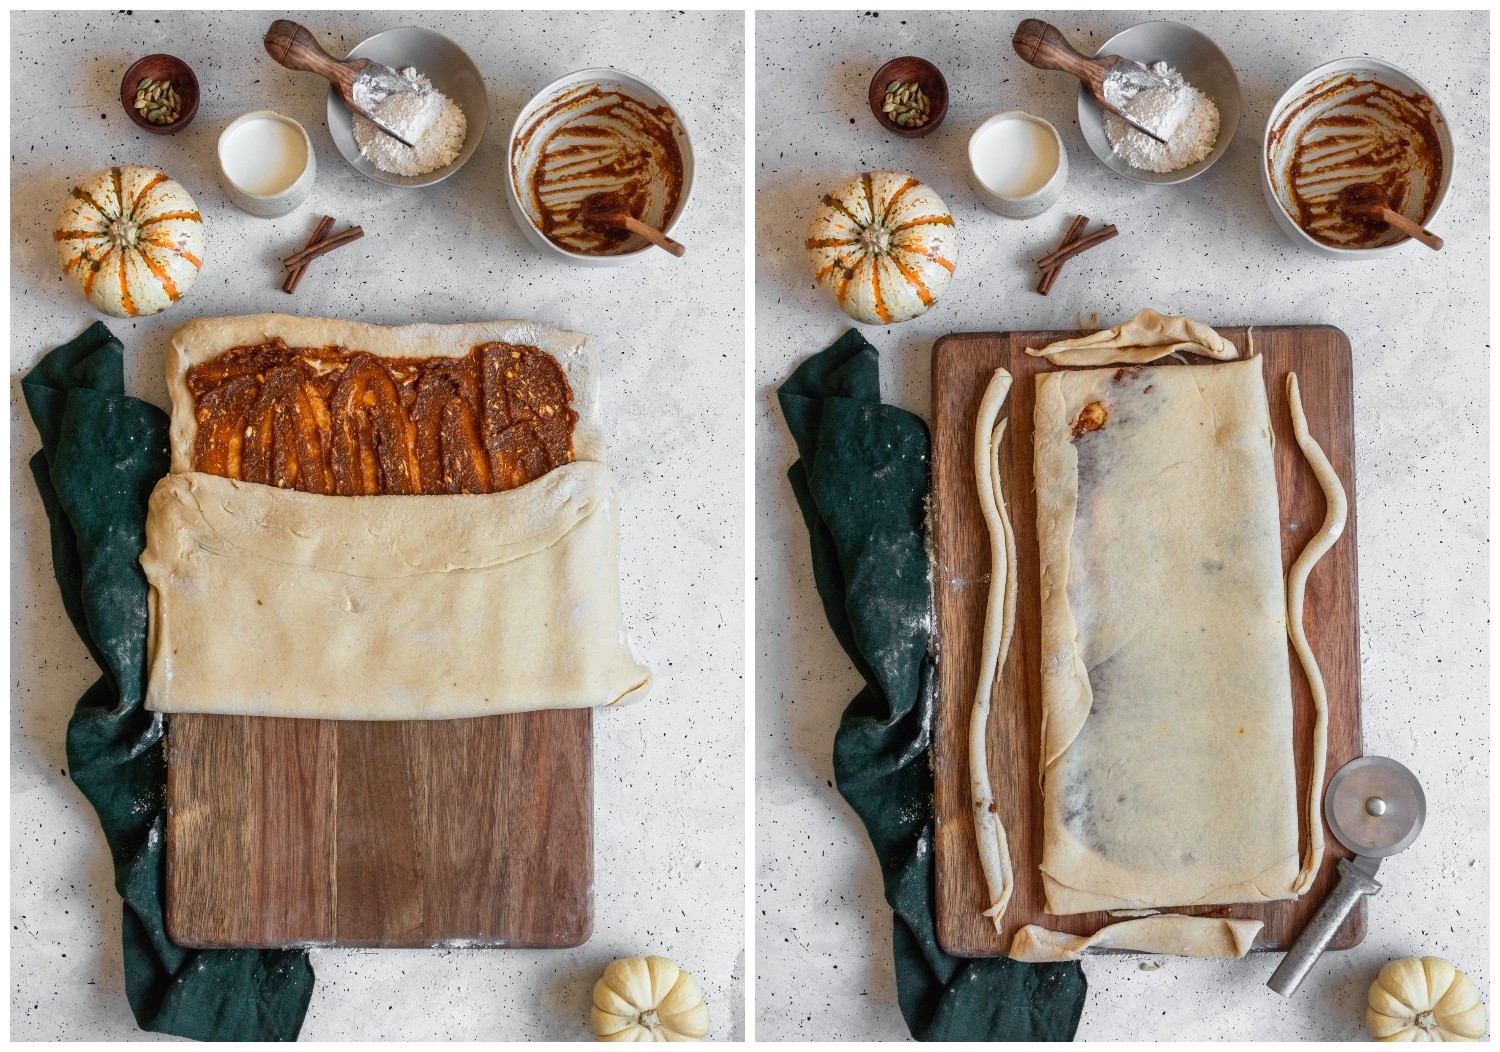 Two photos of sweet roll dough on a grey counter. On the left, the dough is being folded. On the right, the folded dough is being trimmed of its edges.